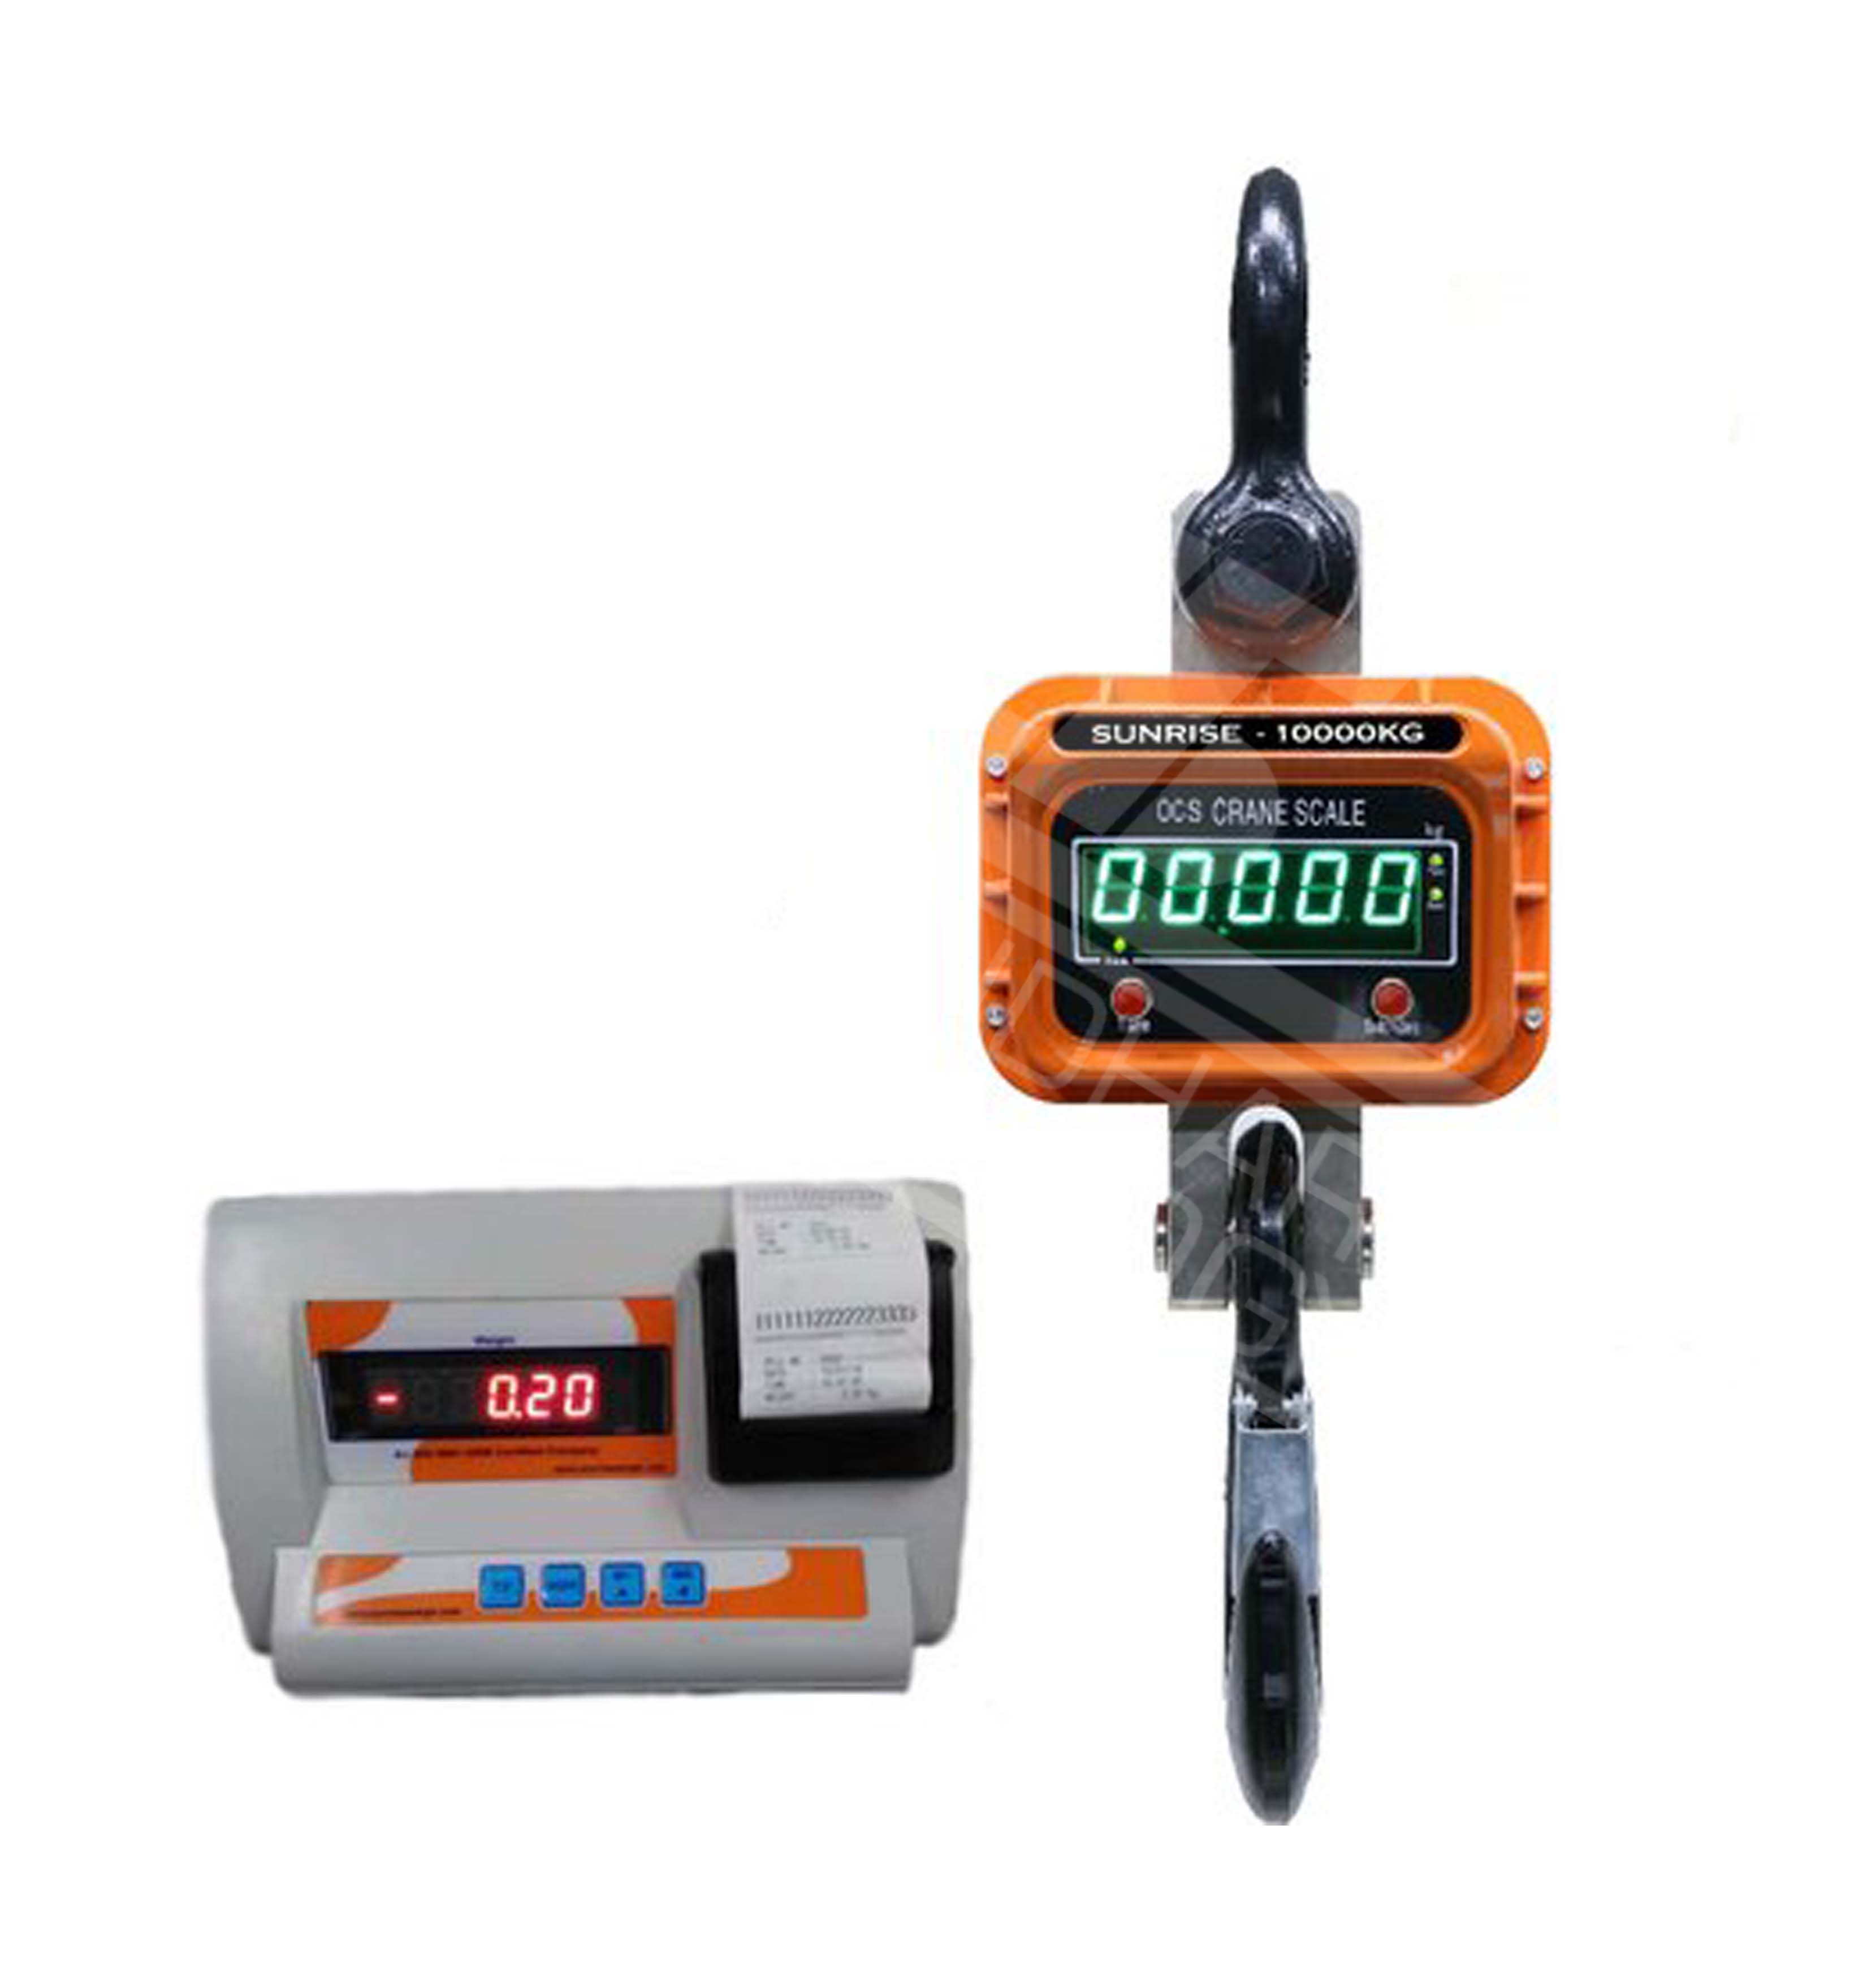 10 Ton Crane Scale With wireless Printer Indicator USB Pen Drive RS232